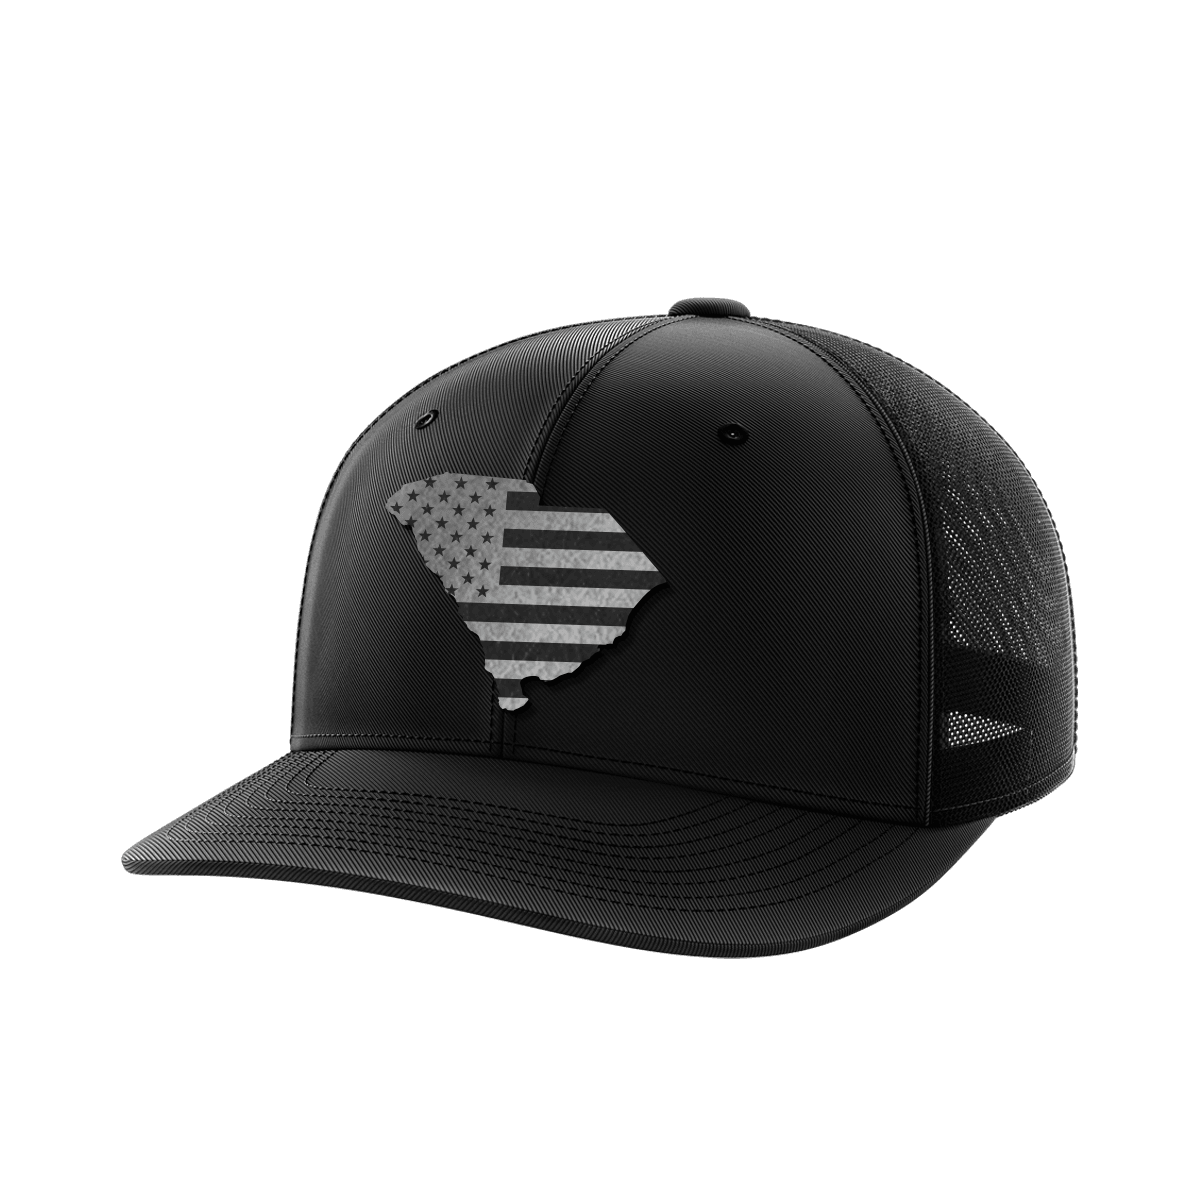 South Carolina United Collection (black leather) - Greater Half